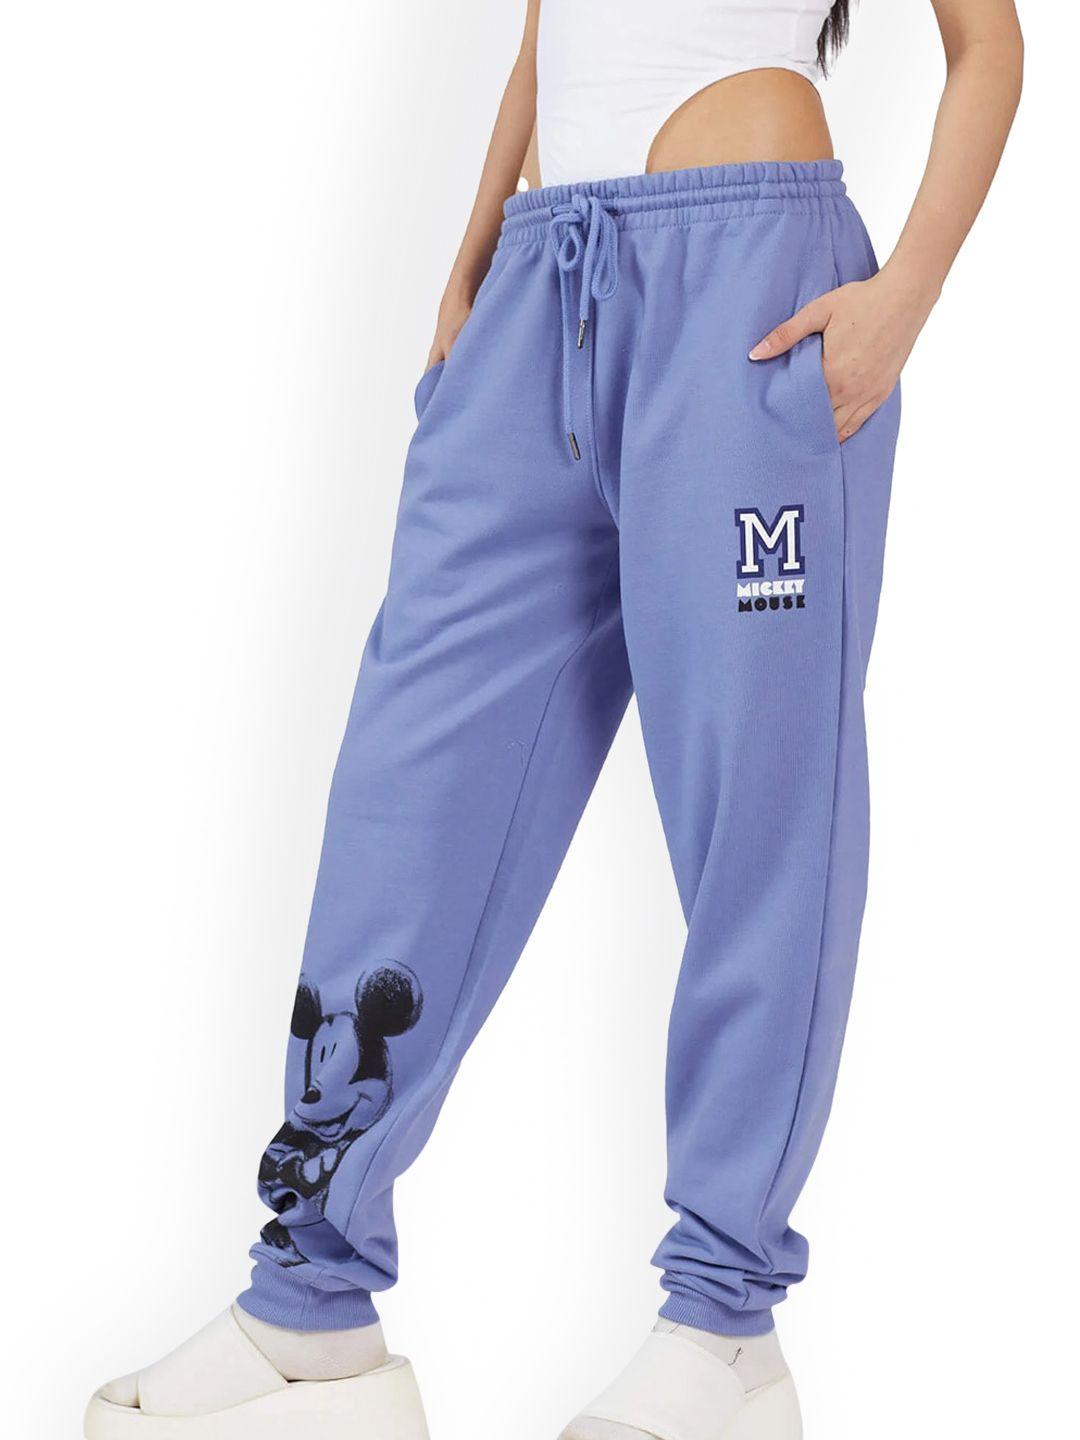 bonkers-corner-women-blue-mickey-mouse-printed-mid-rise-joggers